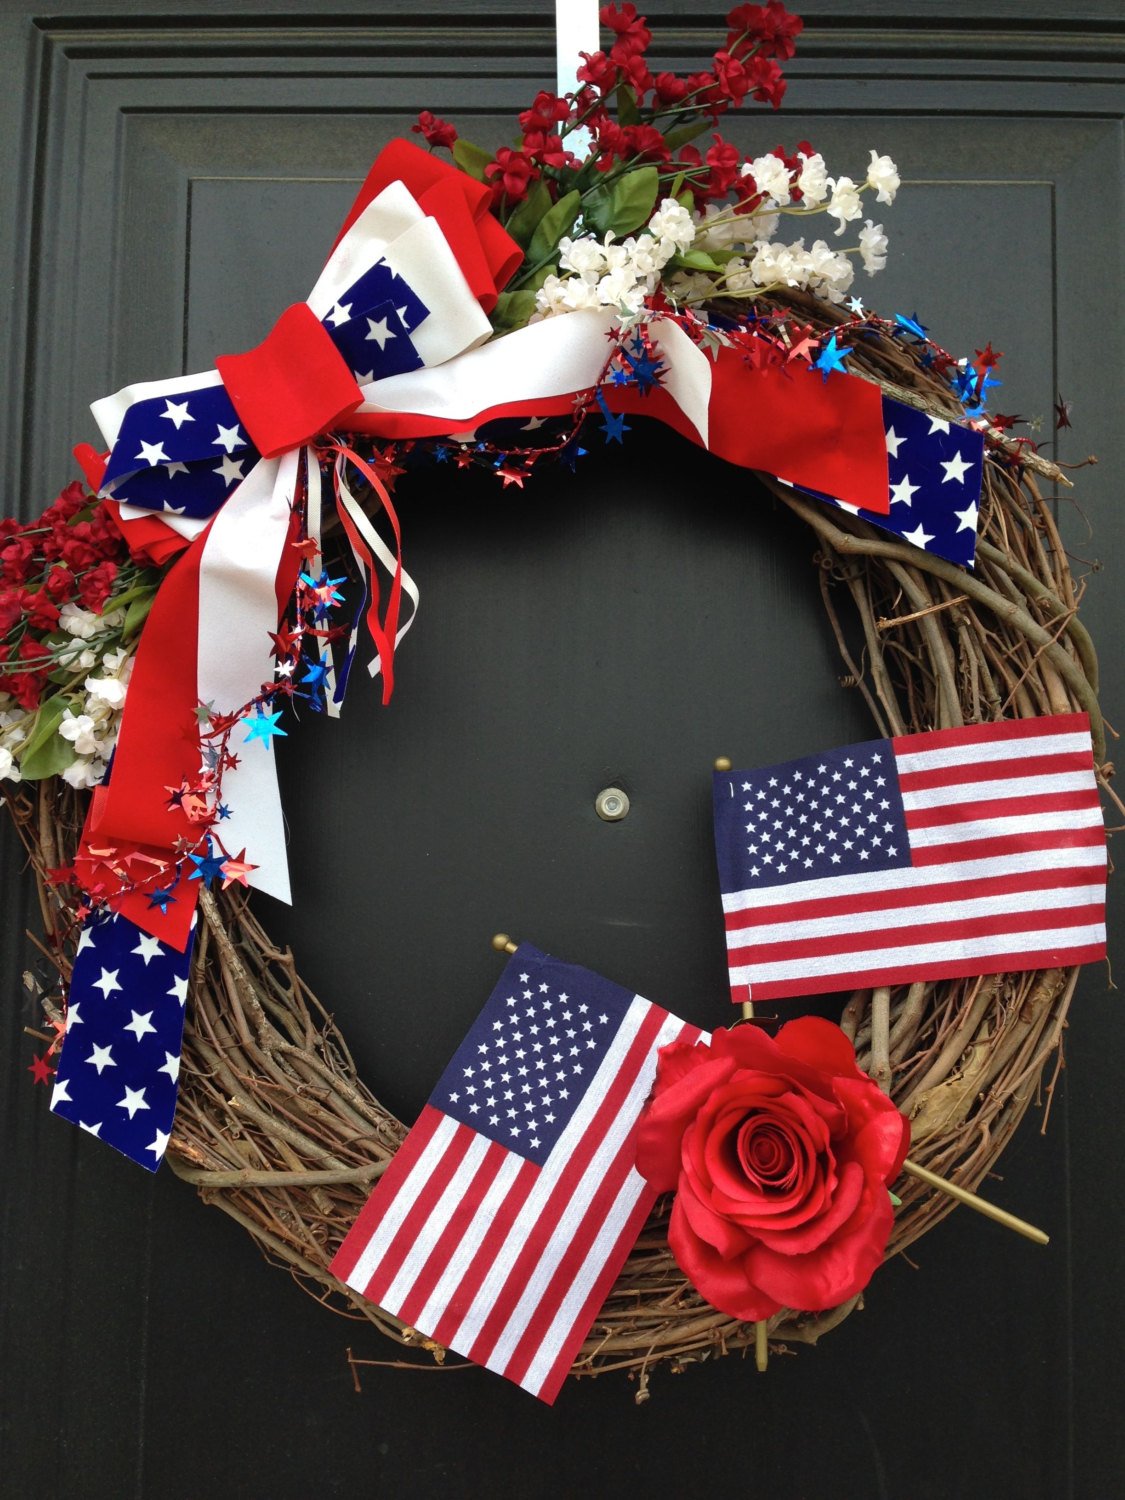 Show Your Patriotism with a 4th of July Wreath